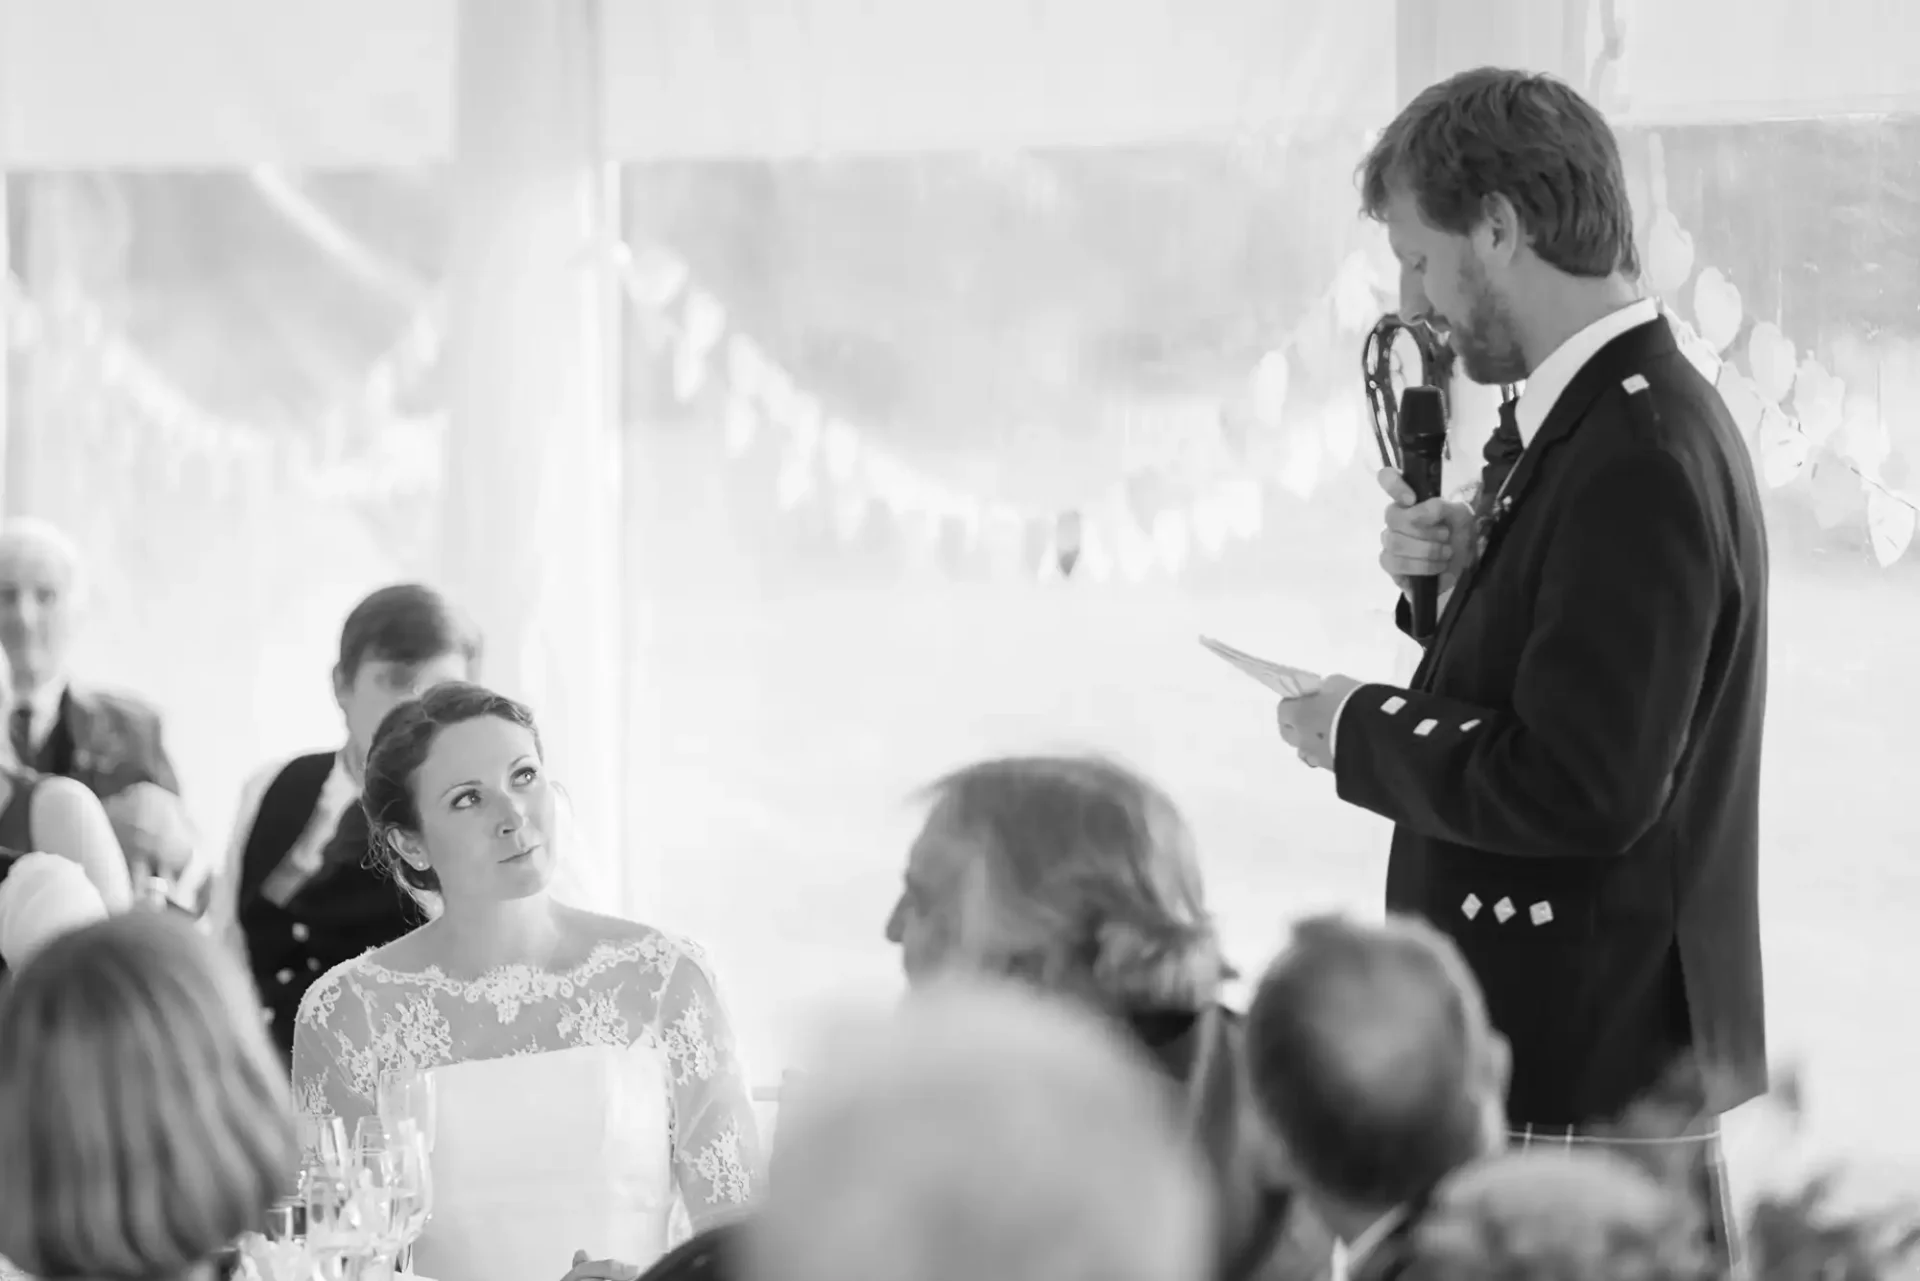 A man in a suit gives a speech with a microphone at a wedding reception, standing beside a seated bride, all in black and white.